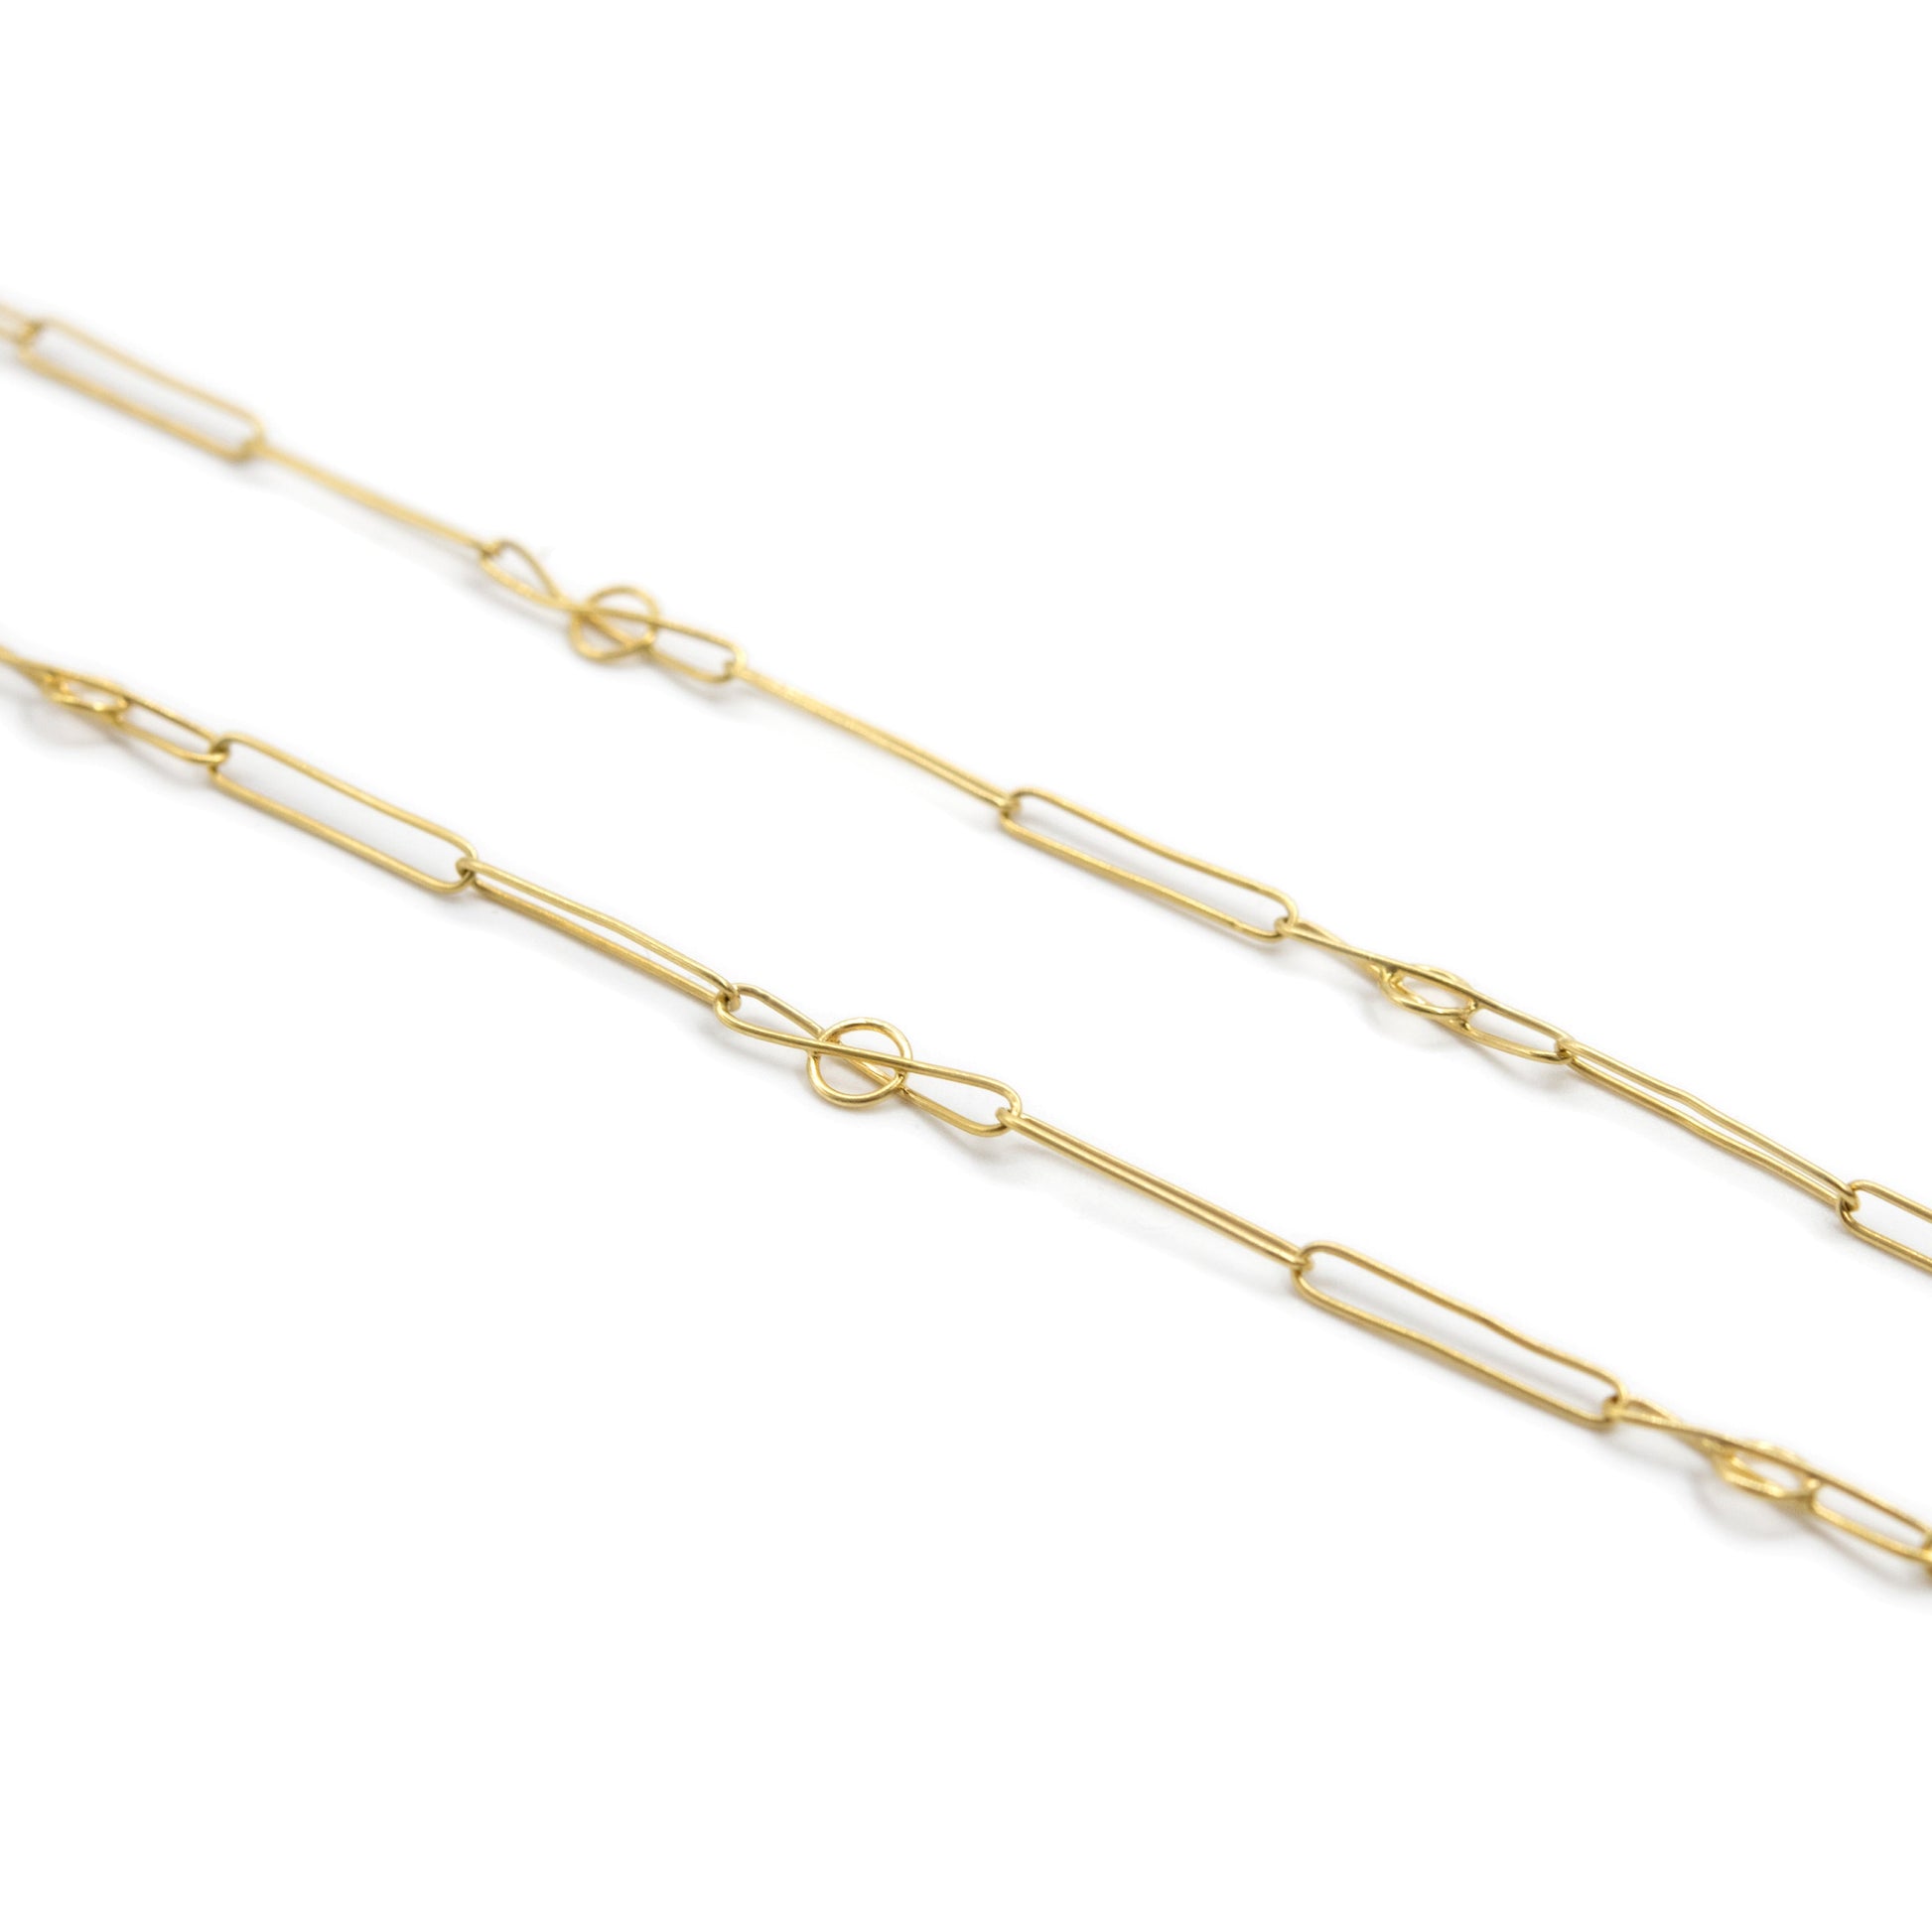 Vintage 18ct Gold Chain Necklaces For Women | Penelope | Vintage jewelry | Lil Milan